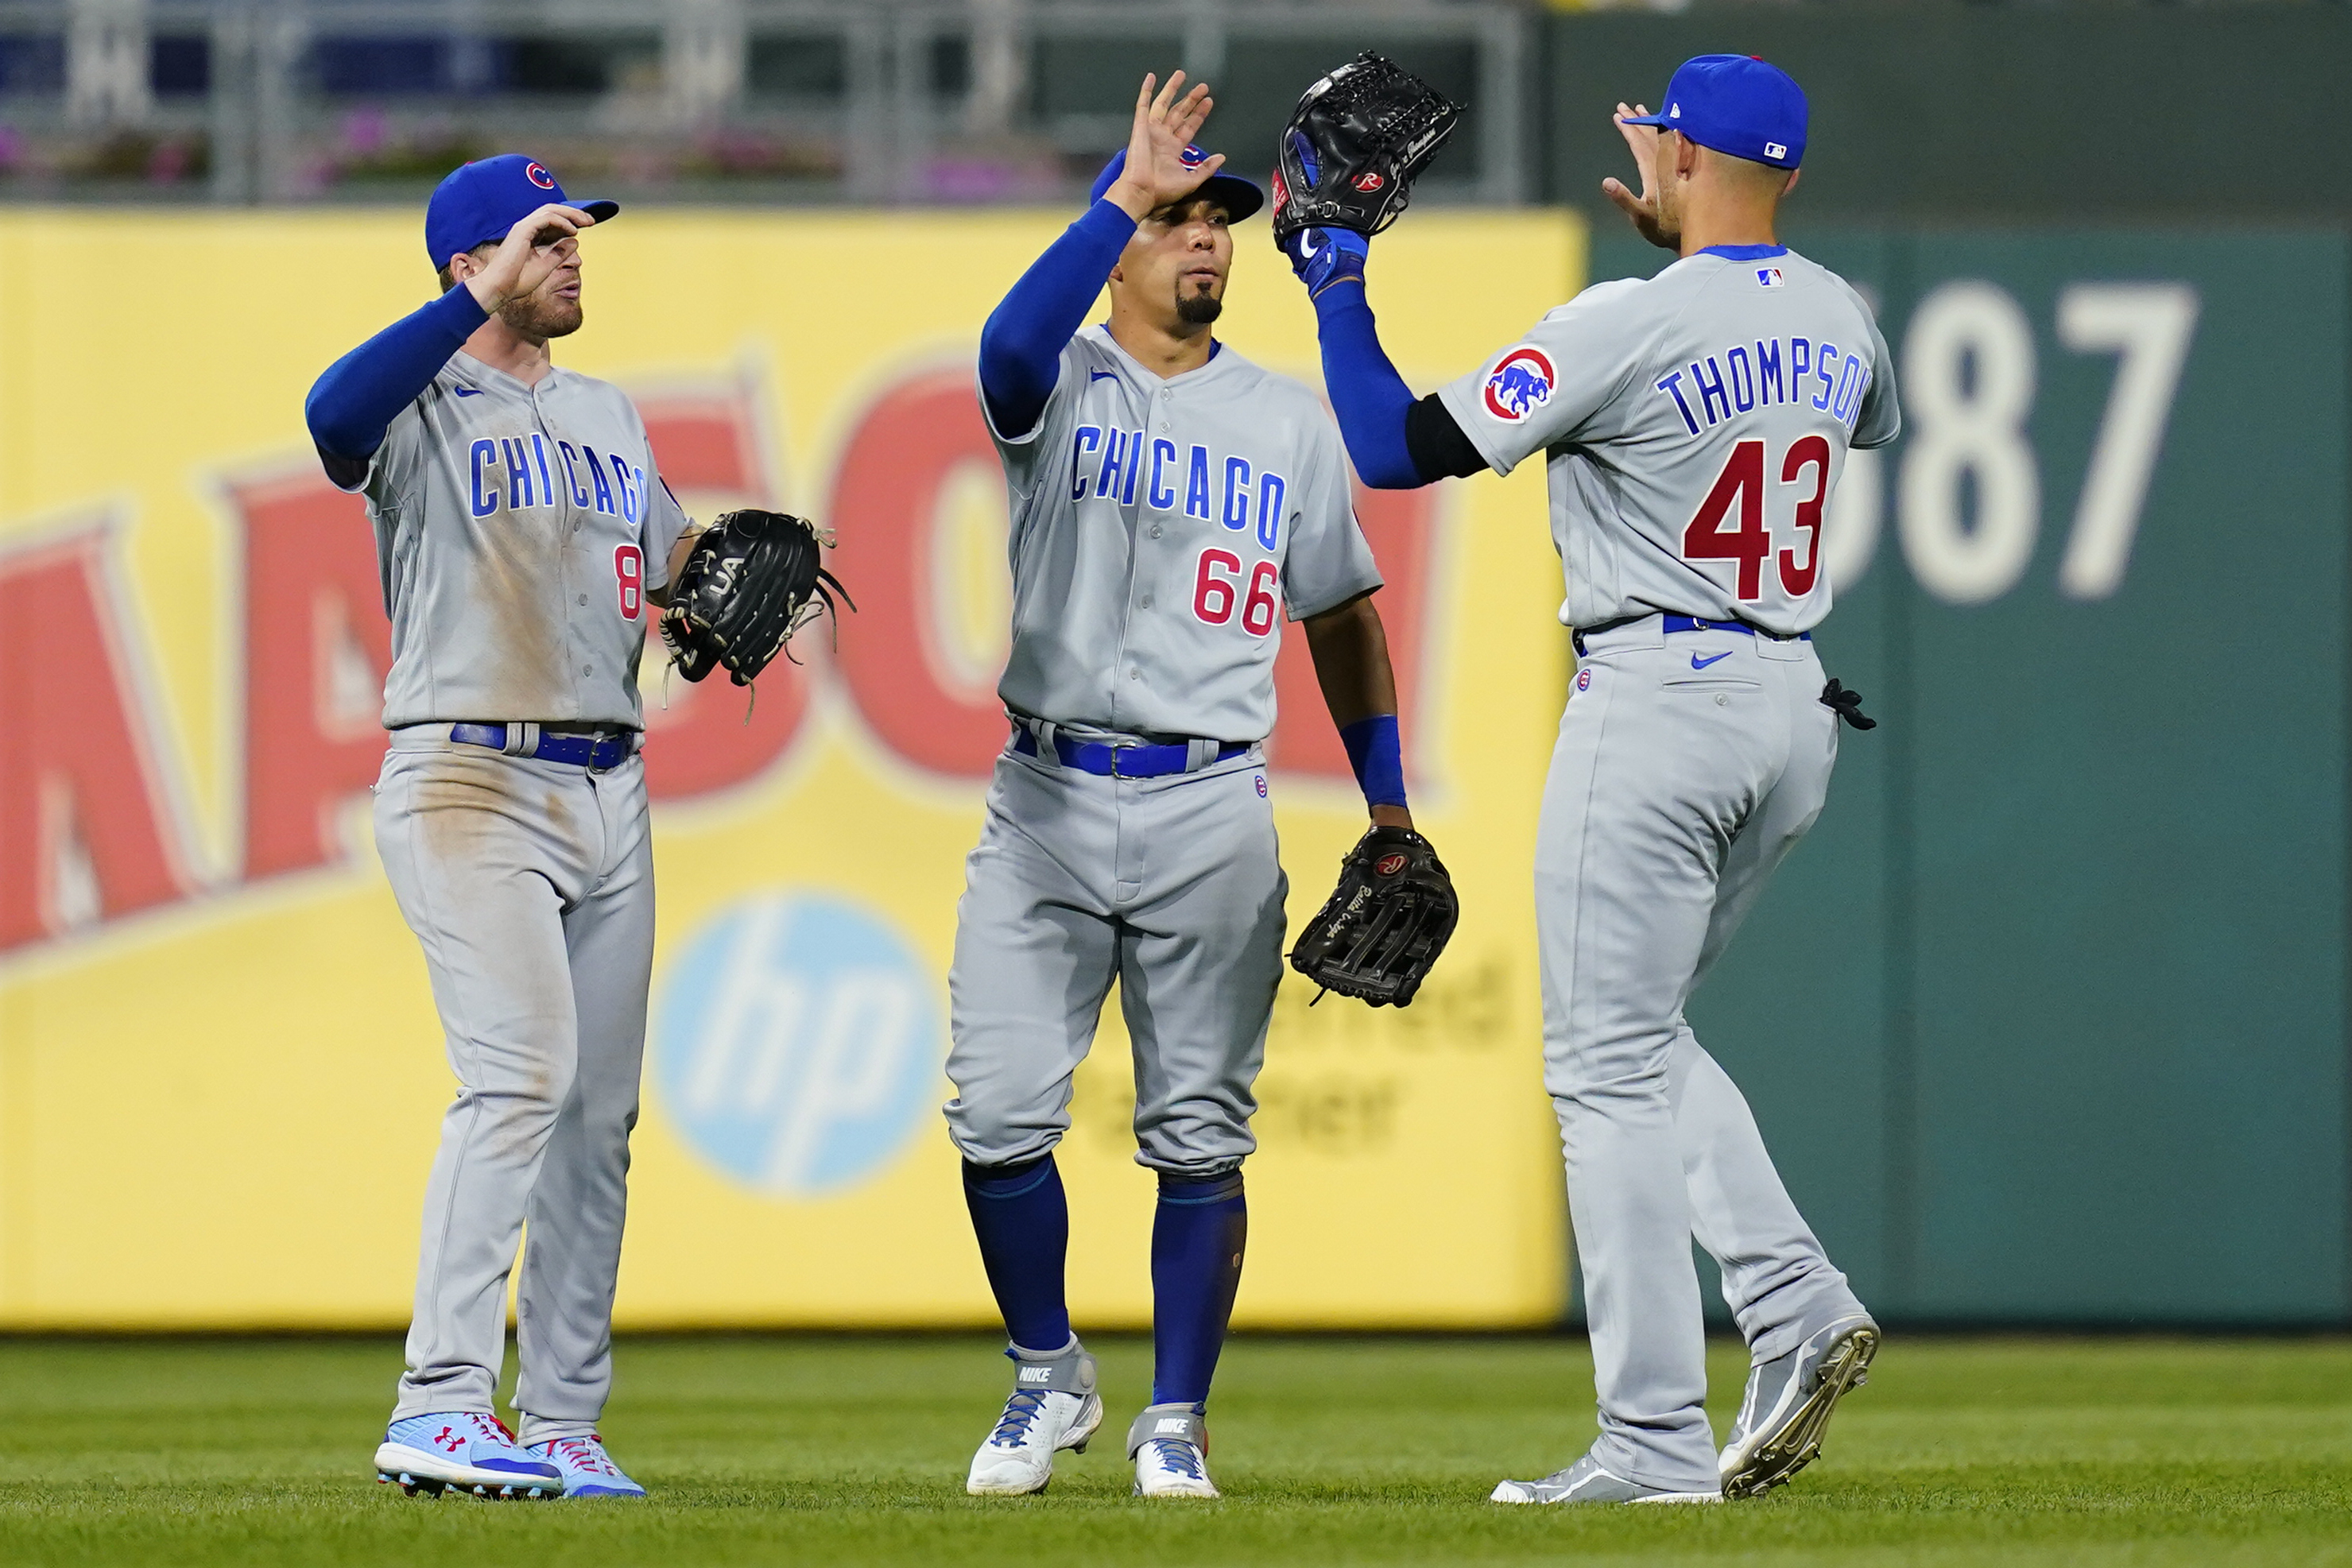 Davies strong, Rizzo, Wisdom homer in Cubs' 7-1 win vs Pads